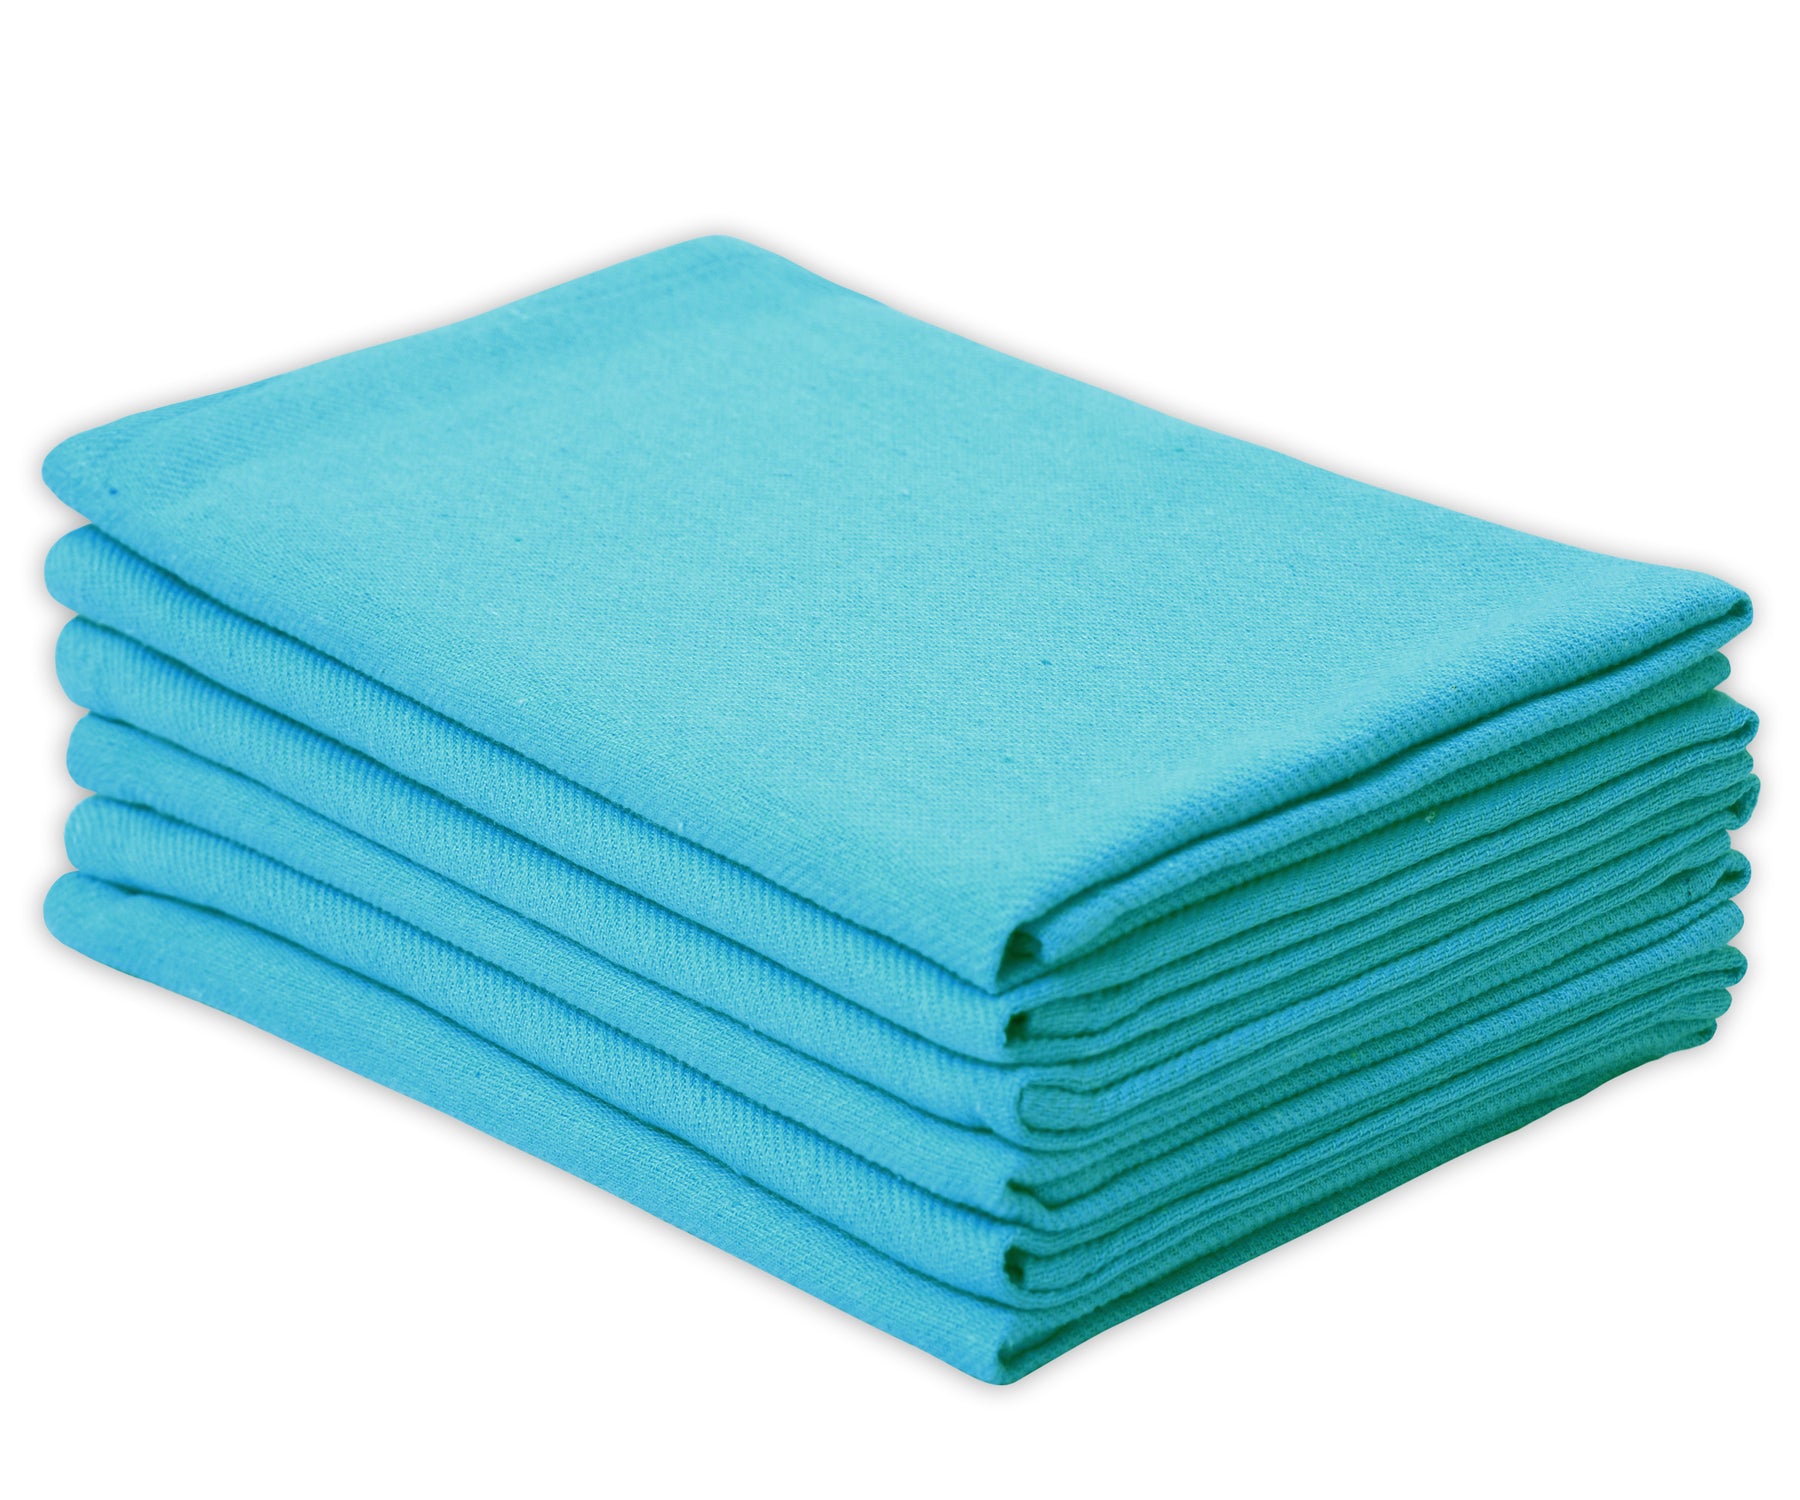 Teal Cloth Napkins - Set the table with stylish teal napkins, adding a touch of sophistication to your dining experience.